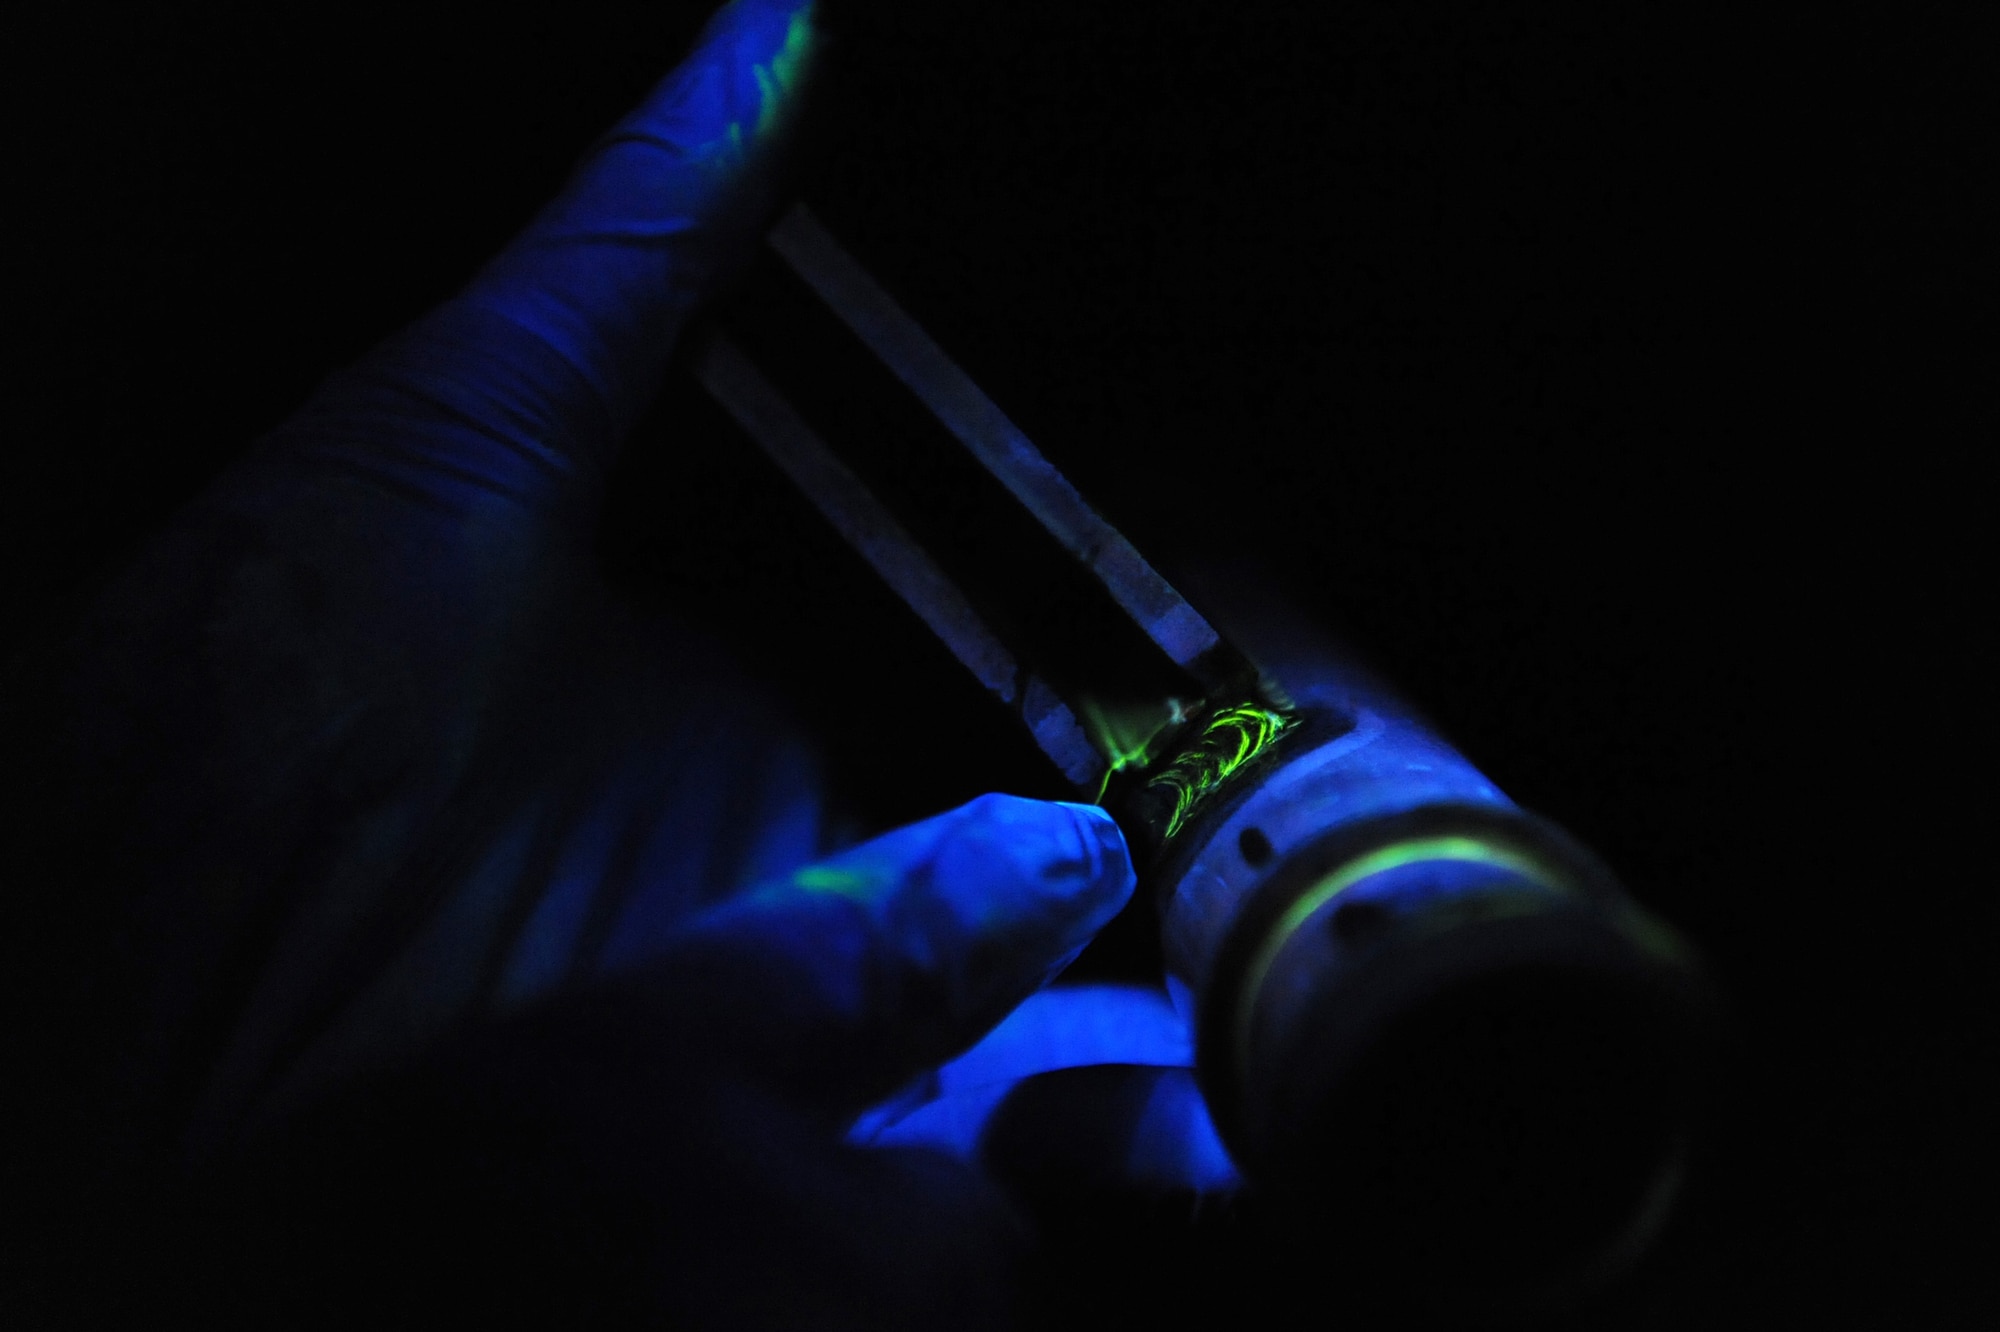 Airman 1st Class Ashton Surber, 19th Equipment Maintenance Squadron non-destructive inspection journeyman, points out a crack on a tow fitting crossbar June 4 during a magnetic particle inspection at the base non-destructive inspection lab. The crack is distinguished by a bright glow when placed under a black light. (U.S. Air Force photo by Senior Airman Ethan Morgan)